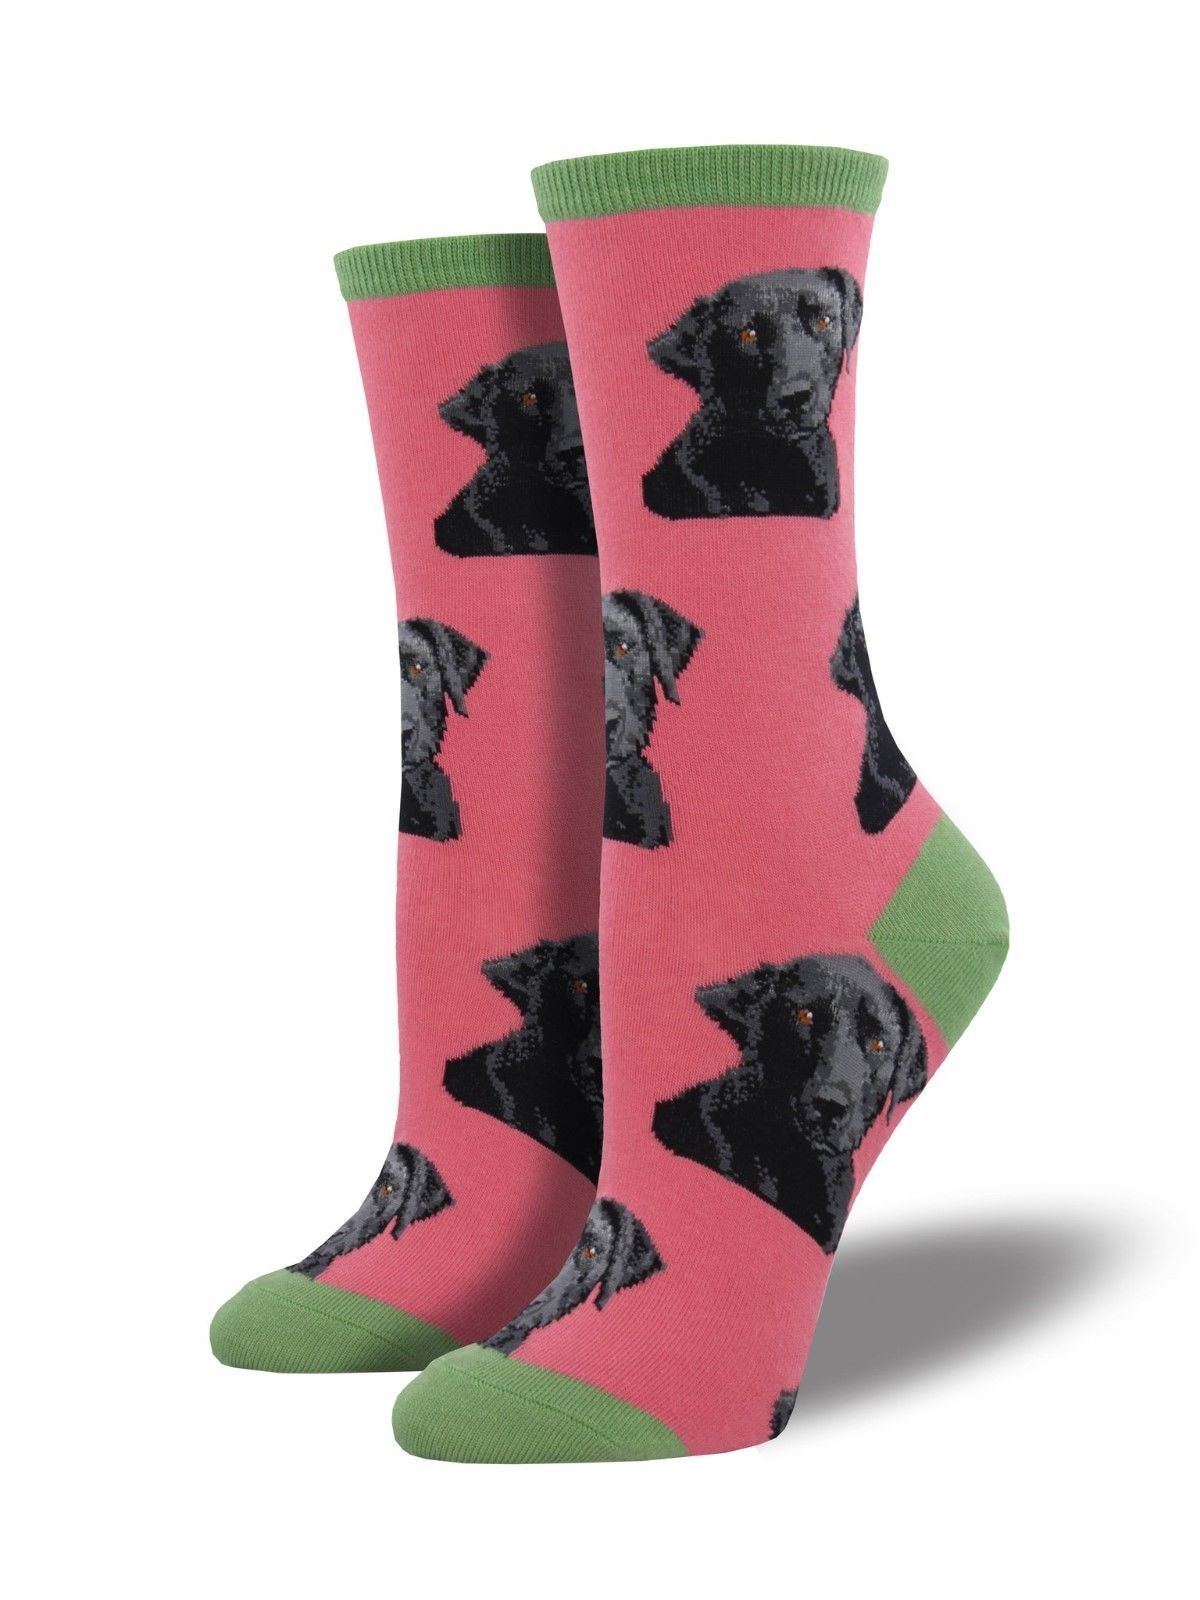 Primary image for Socksmith Women's Socks Novelty Crew Cut Socks "Lab-or Of Love" / Dusty Pink